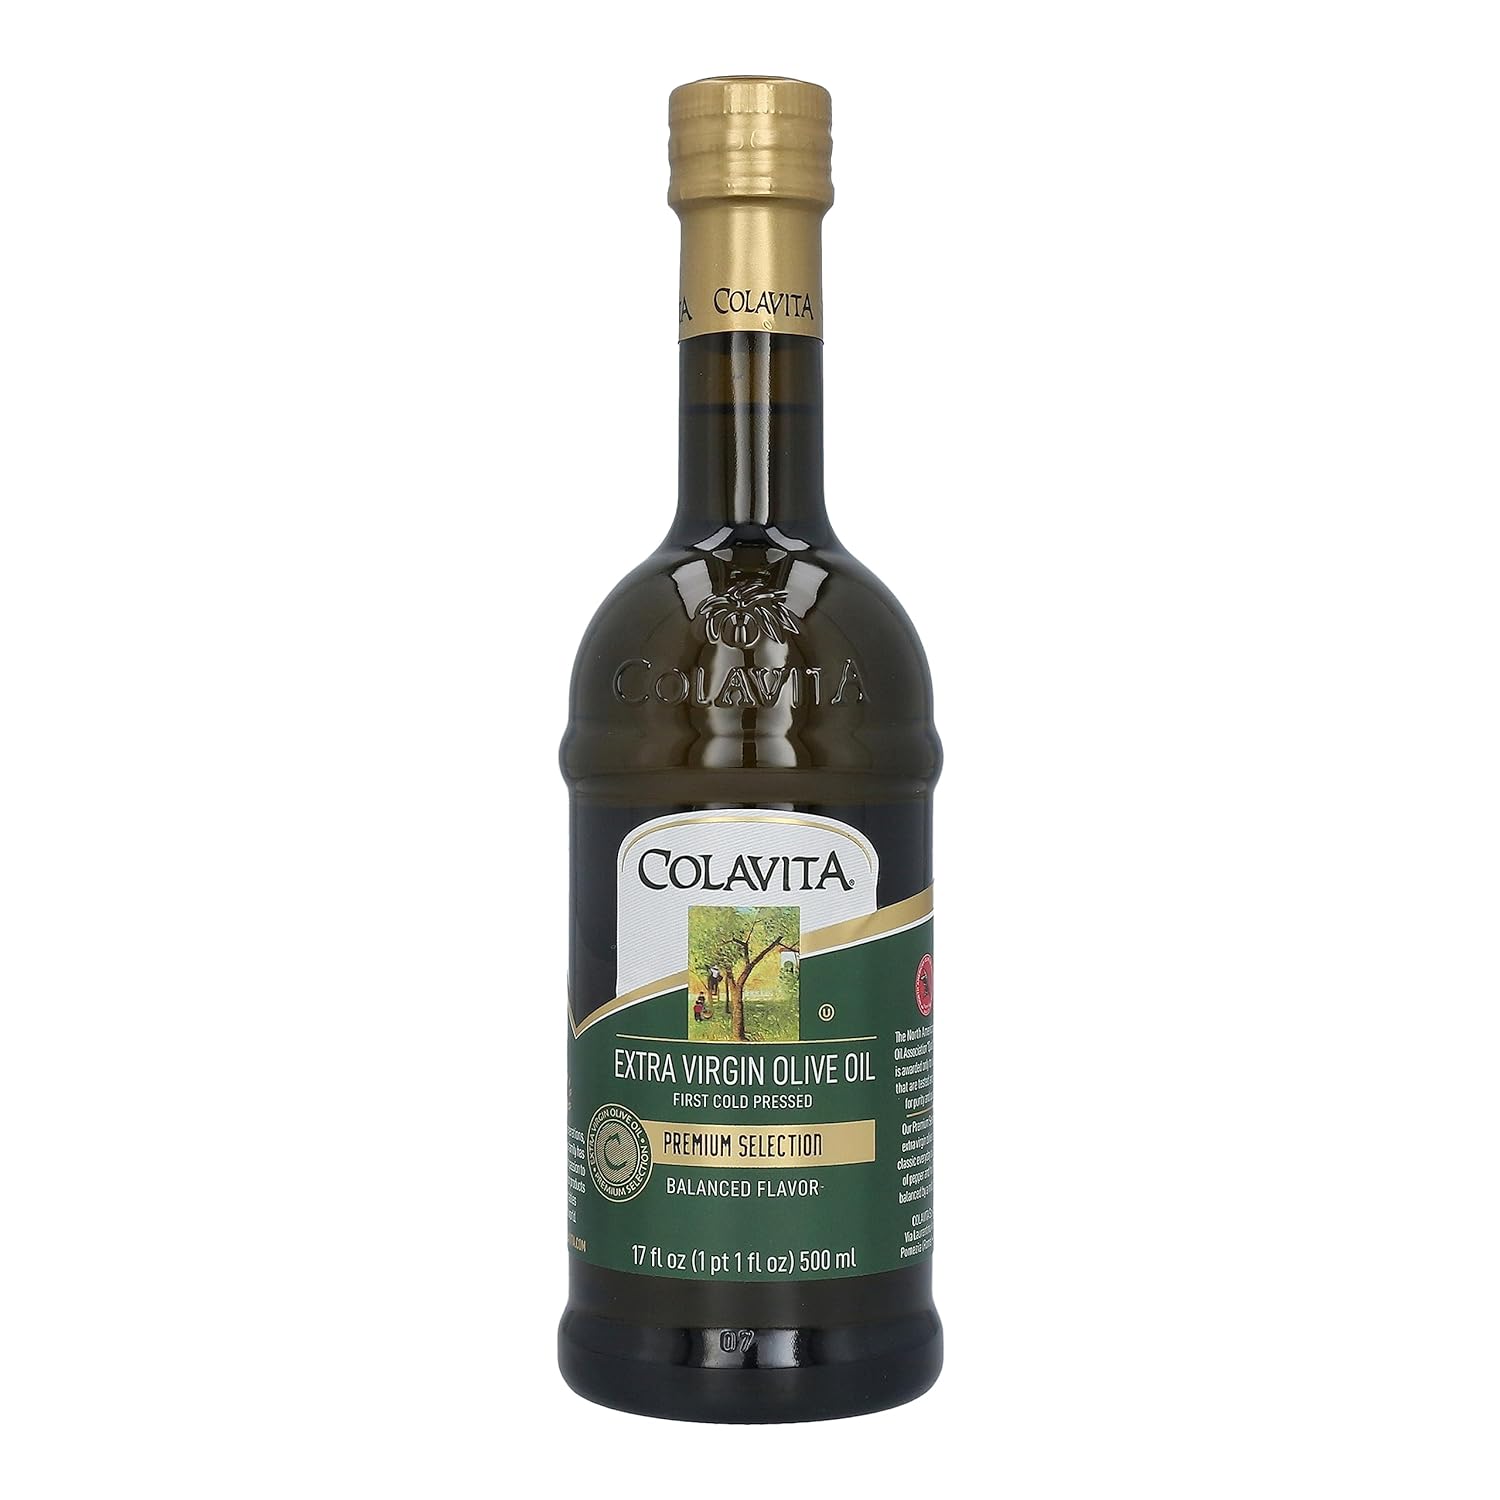 Extra Virgin Olive Oil - Colavita - Premium Selection - First Cold Pressed EVOO - 17oz Glass Bottle